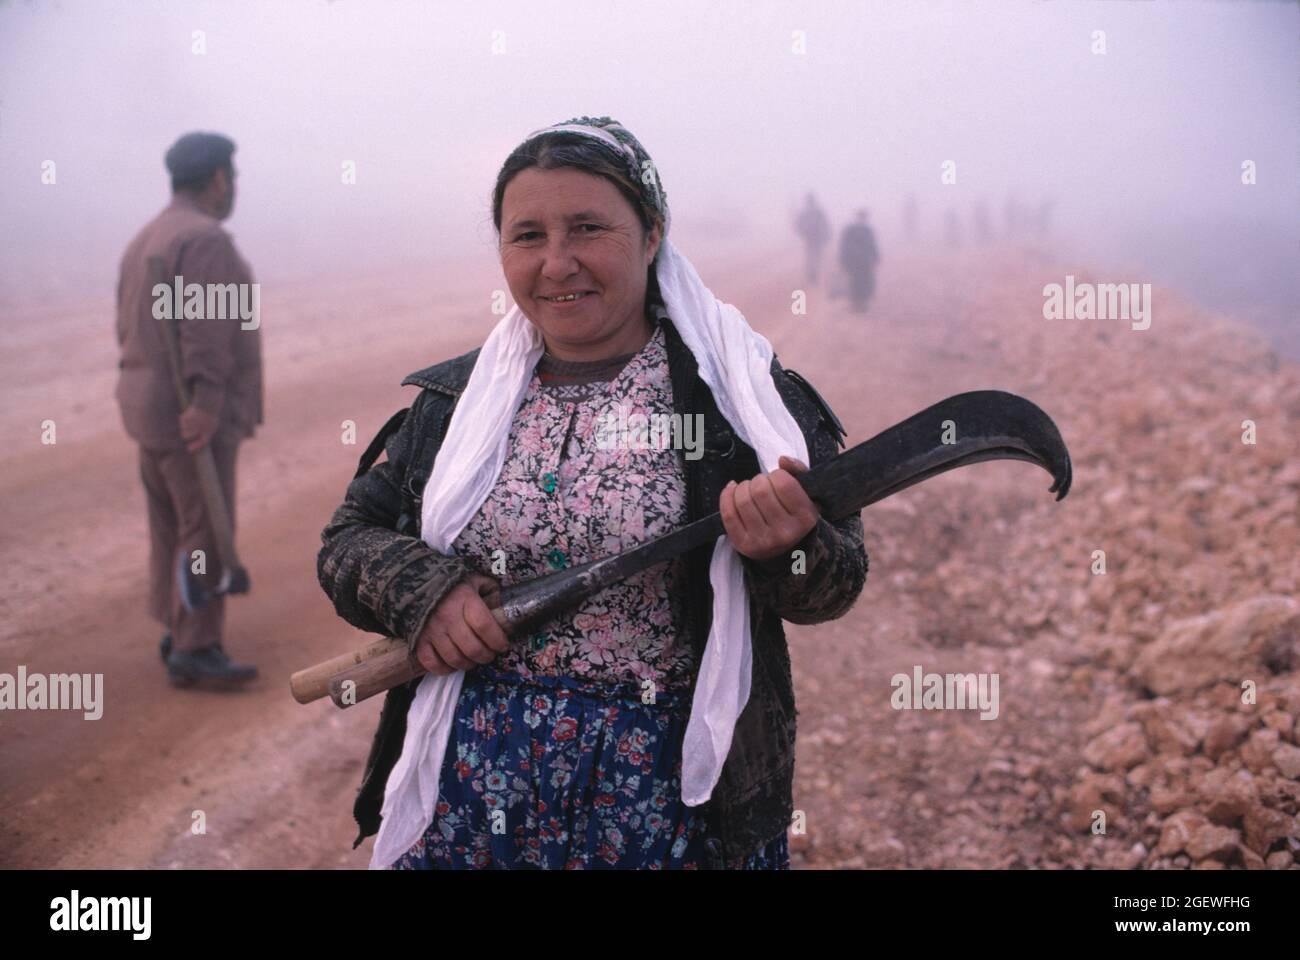 Turkey. Rural south west region. Local woman road worker holding scythe. Stock Photo